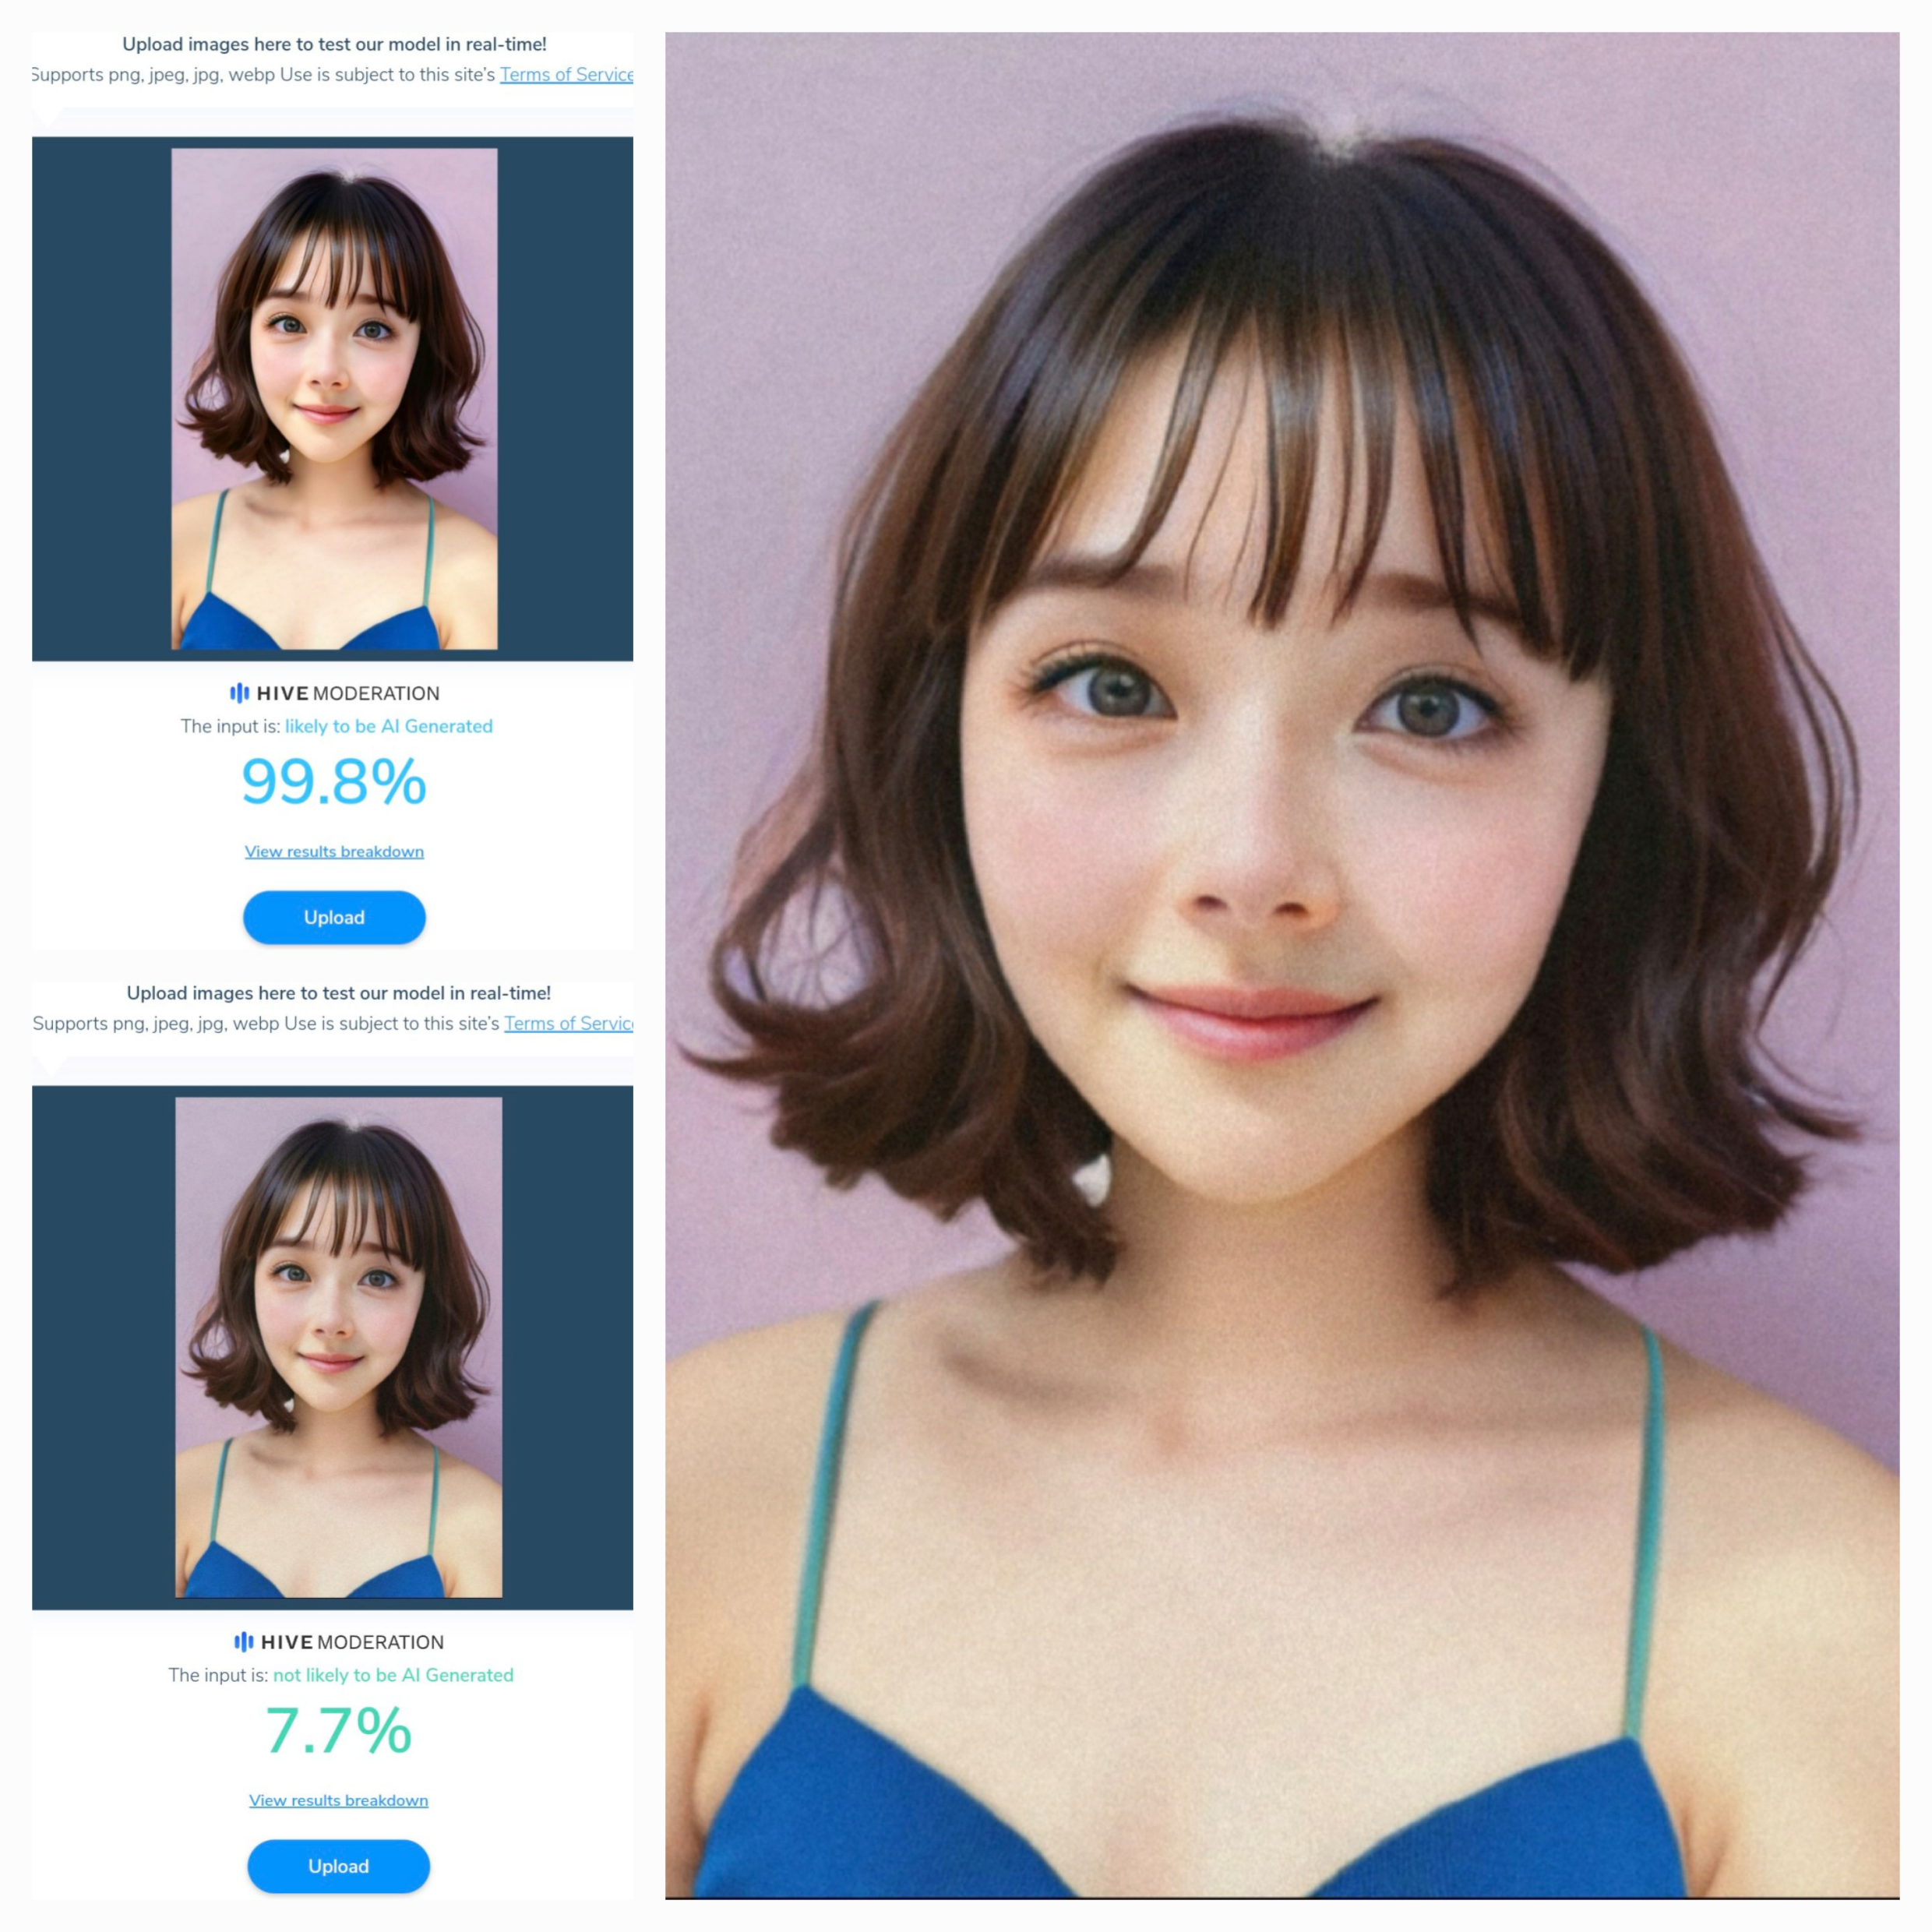 The photo on the upper left is real but has been modified with the app FaceApp. Hive Moderation, however, concluded that it was generated by artificial intelligence. The same photo, on the bottom right, has been slightly altered in a different way and, bizarrely, the tool no longer says it was generated by artificial intelligence.